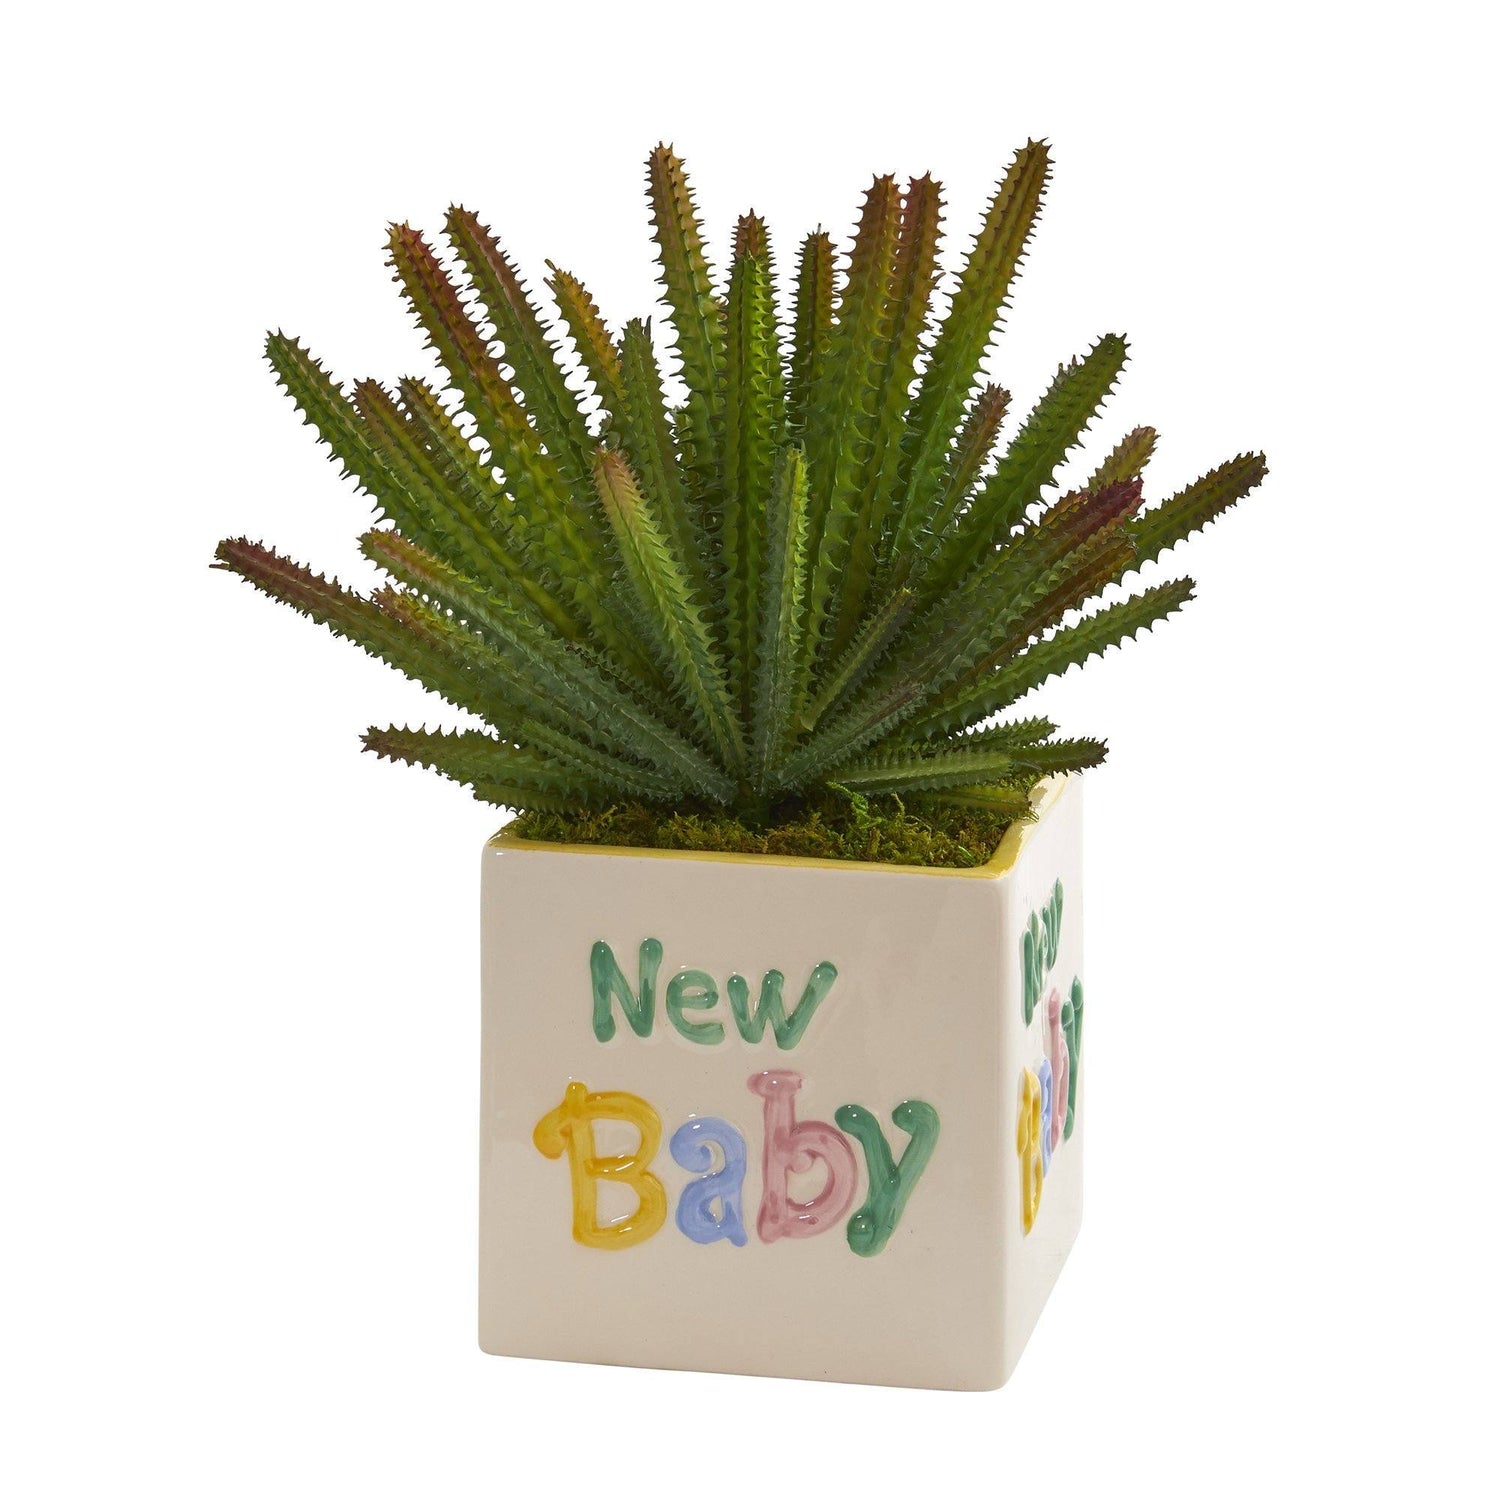 11” Cactus Artificial Plant in “New Baby” Planter